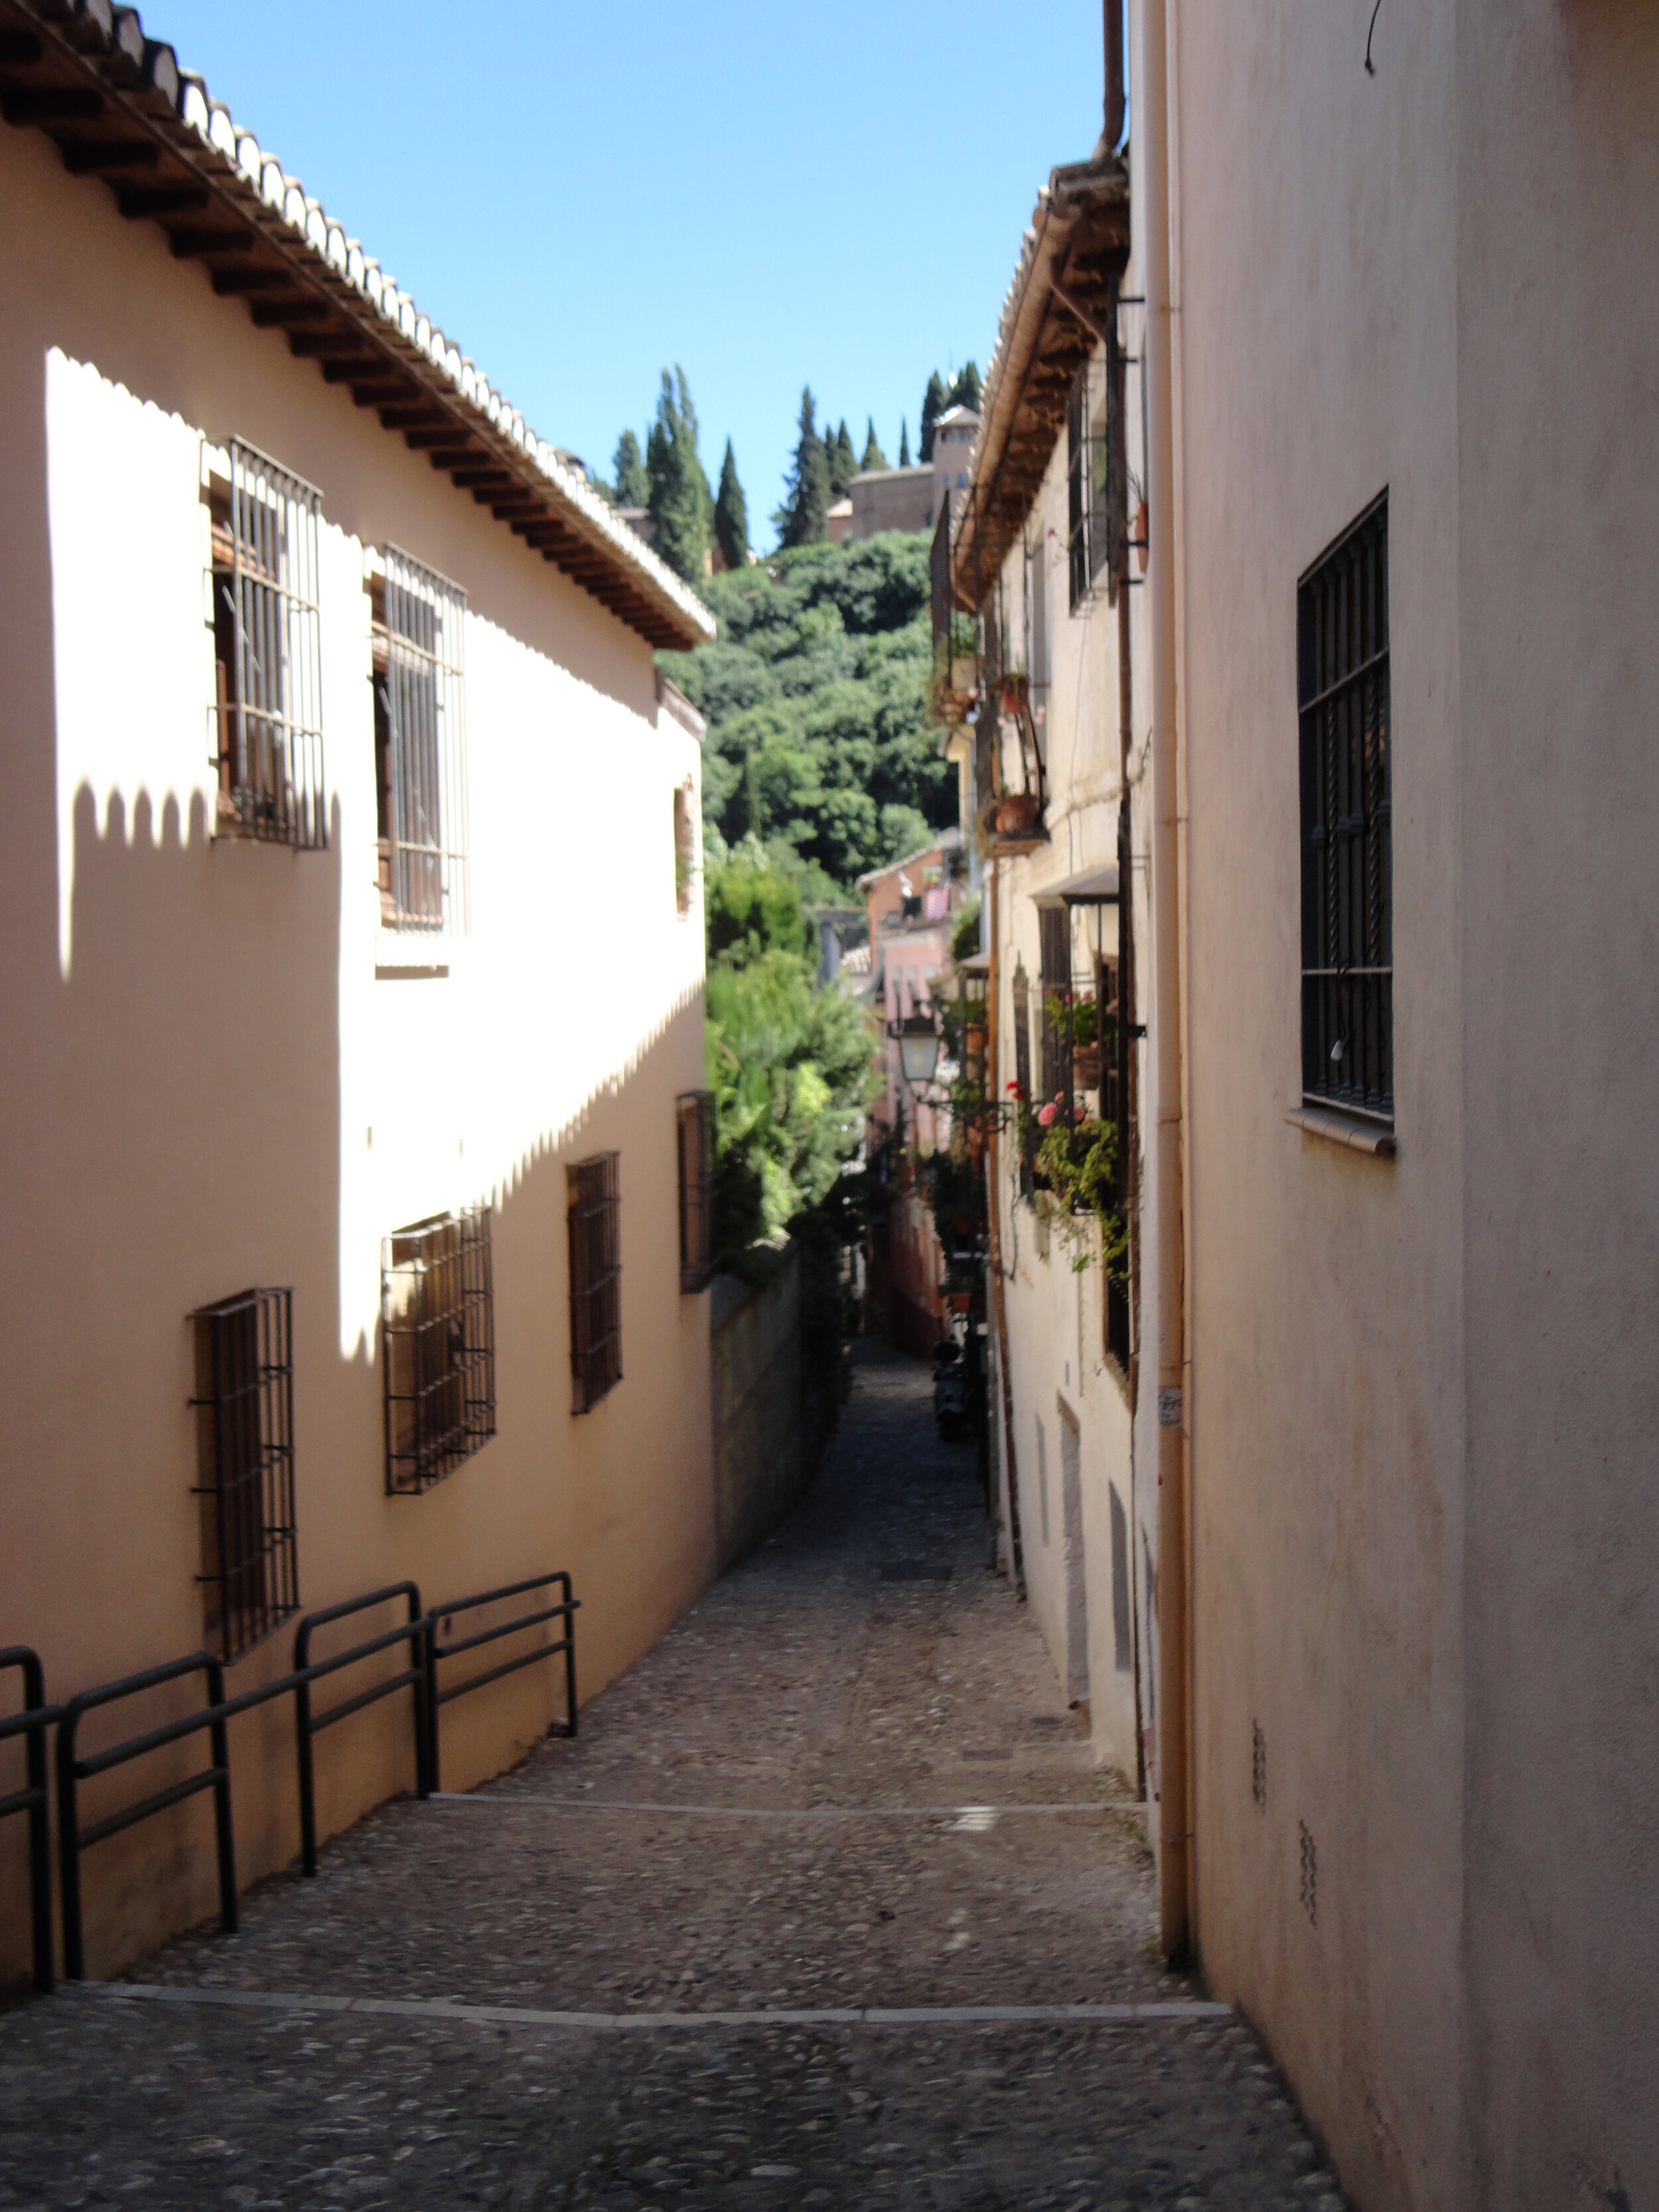 Windy streets with a view of the Alhambra. Granada, Spain